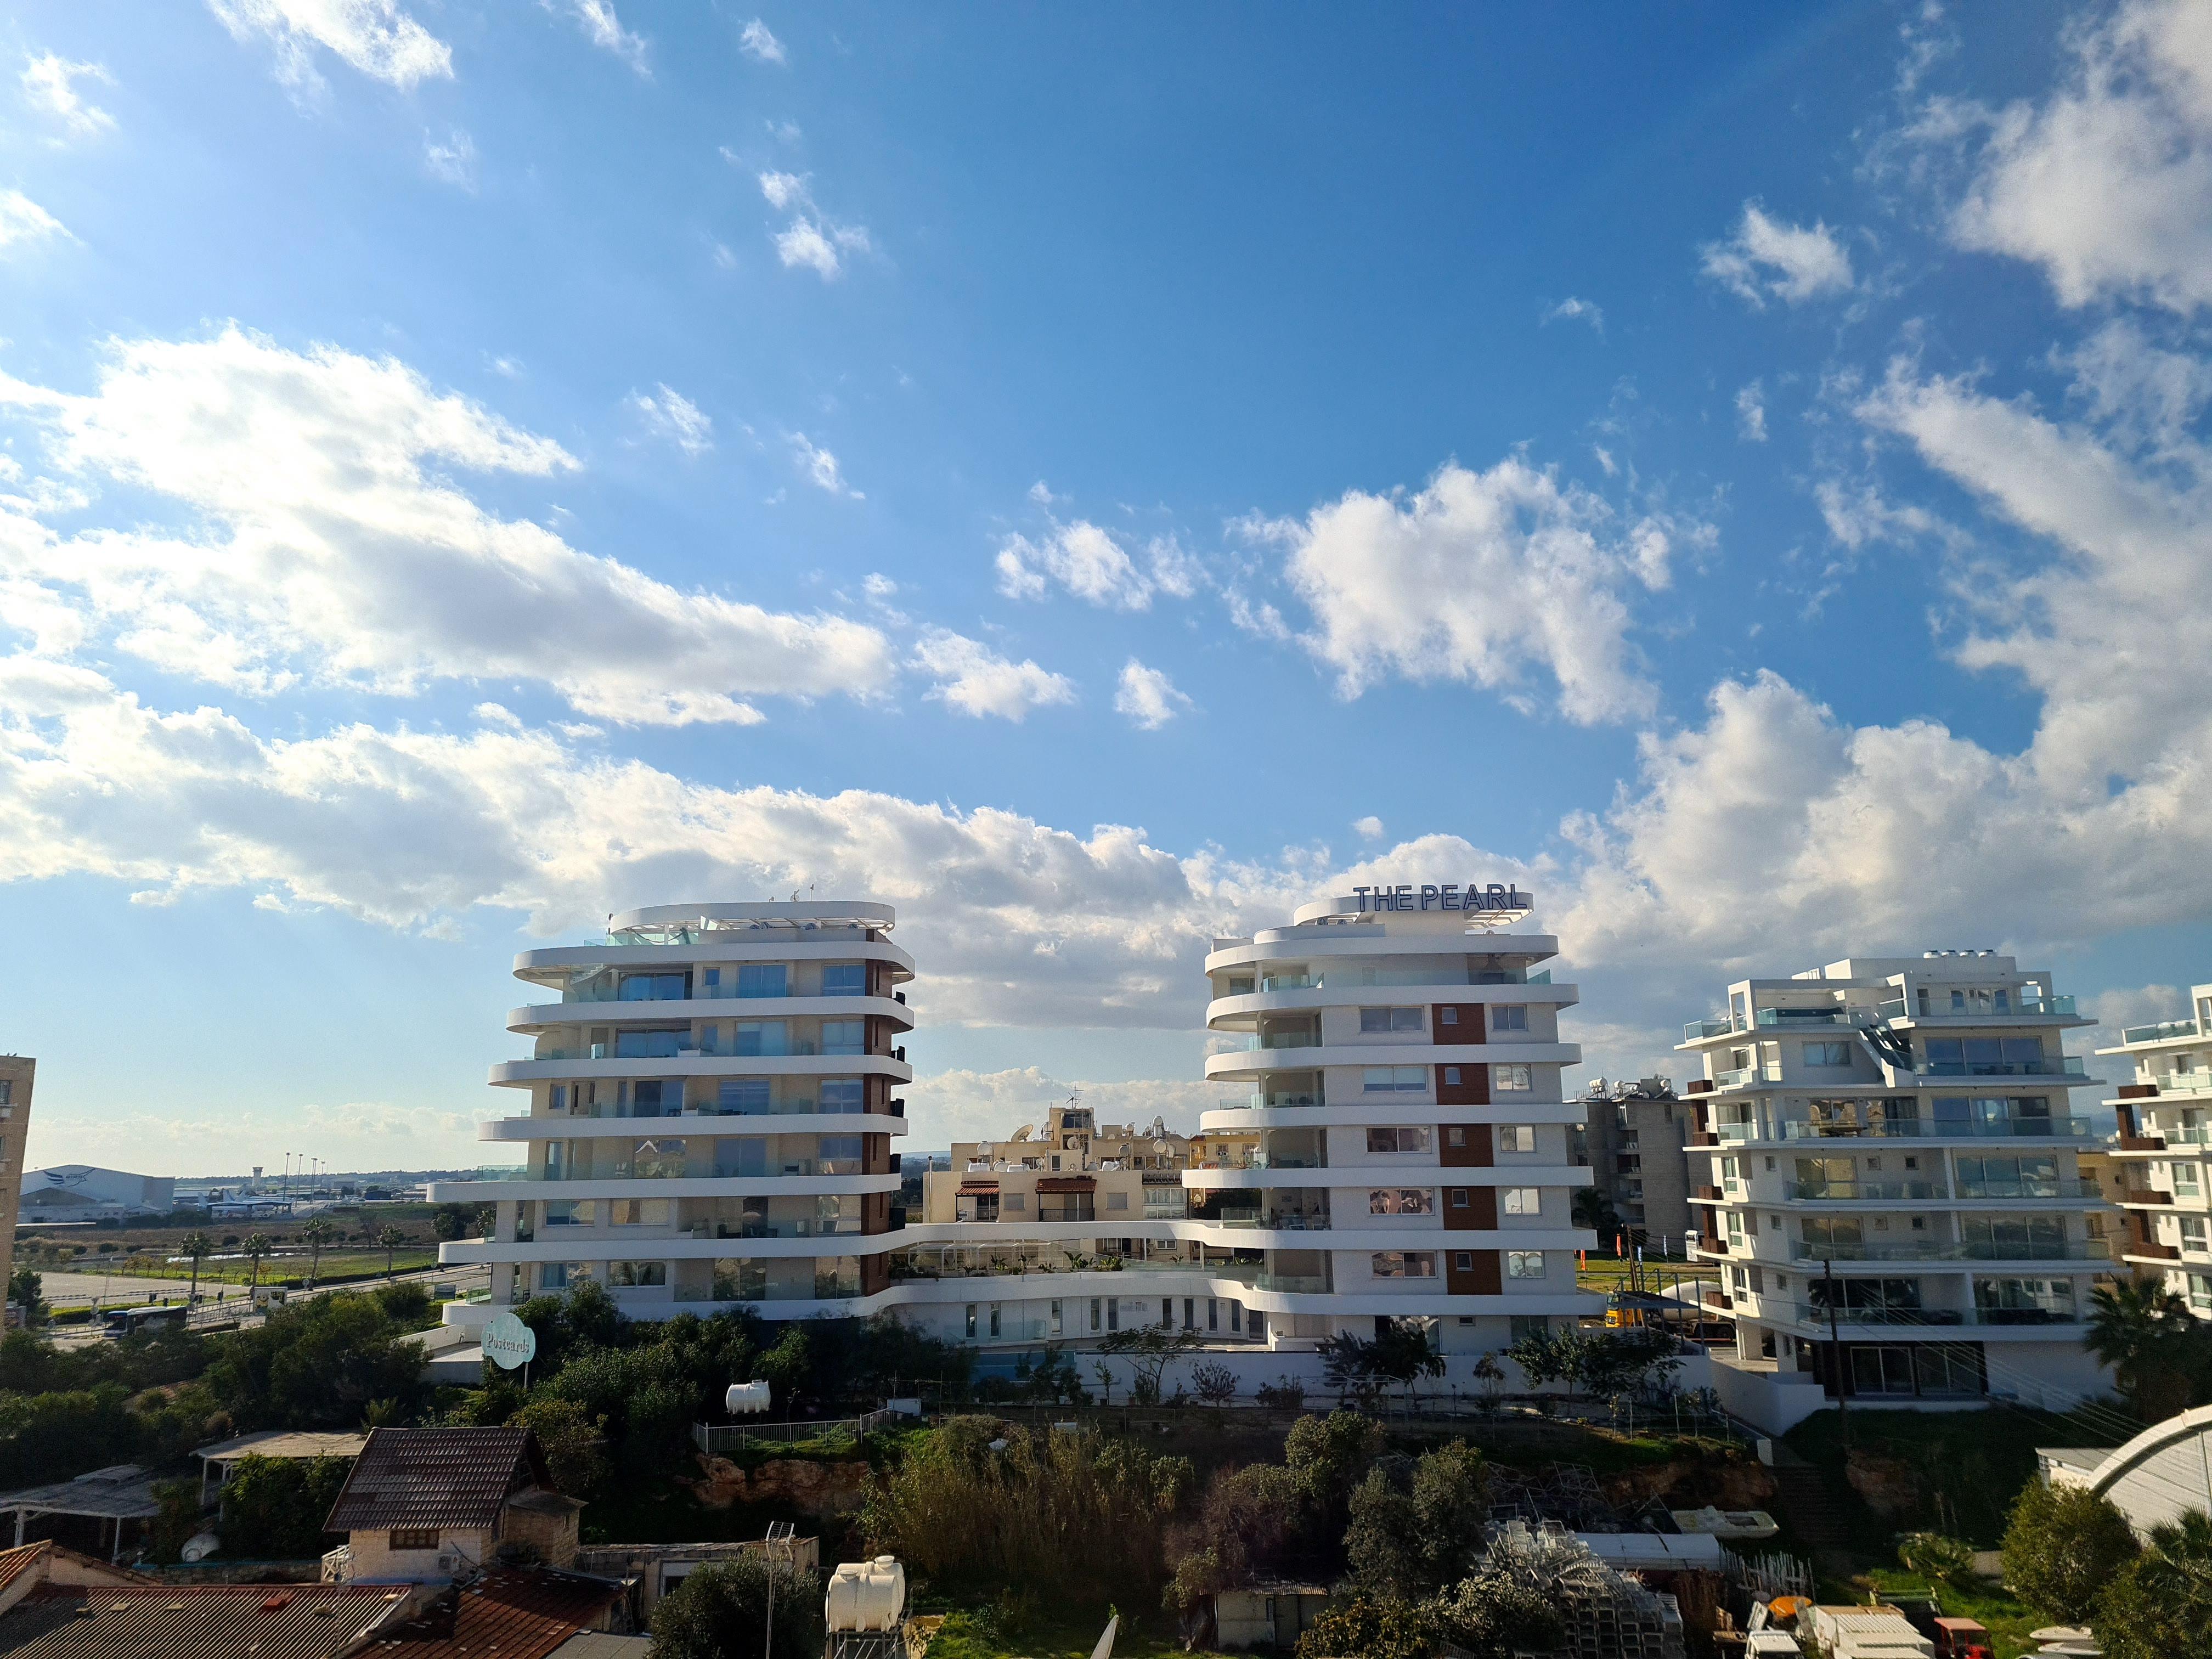 The Ciao Stelio Deluxe Hotel (Adults Only) Larnaca Ngoại thất bức ảnh